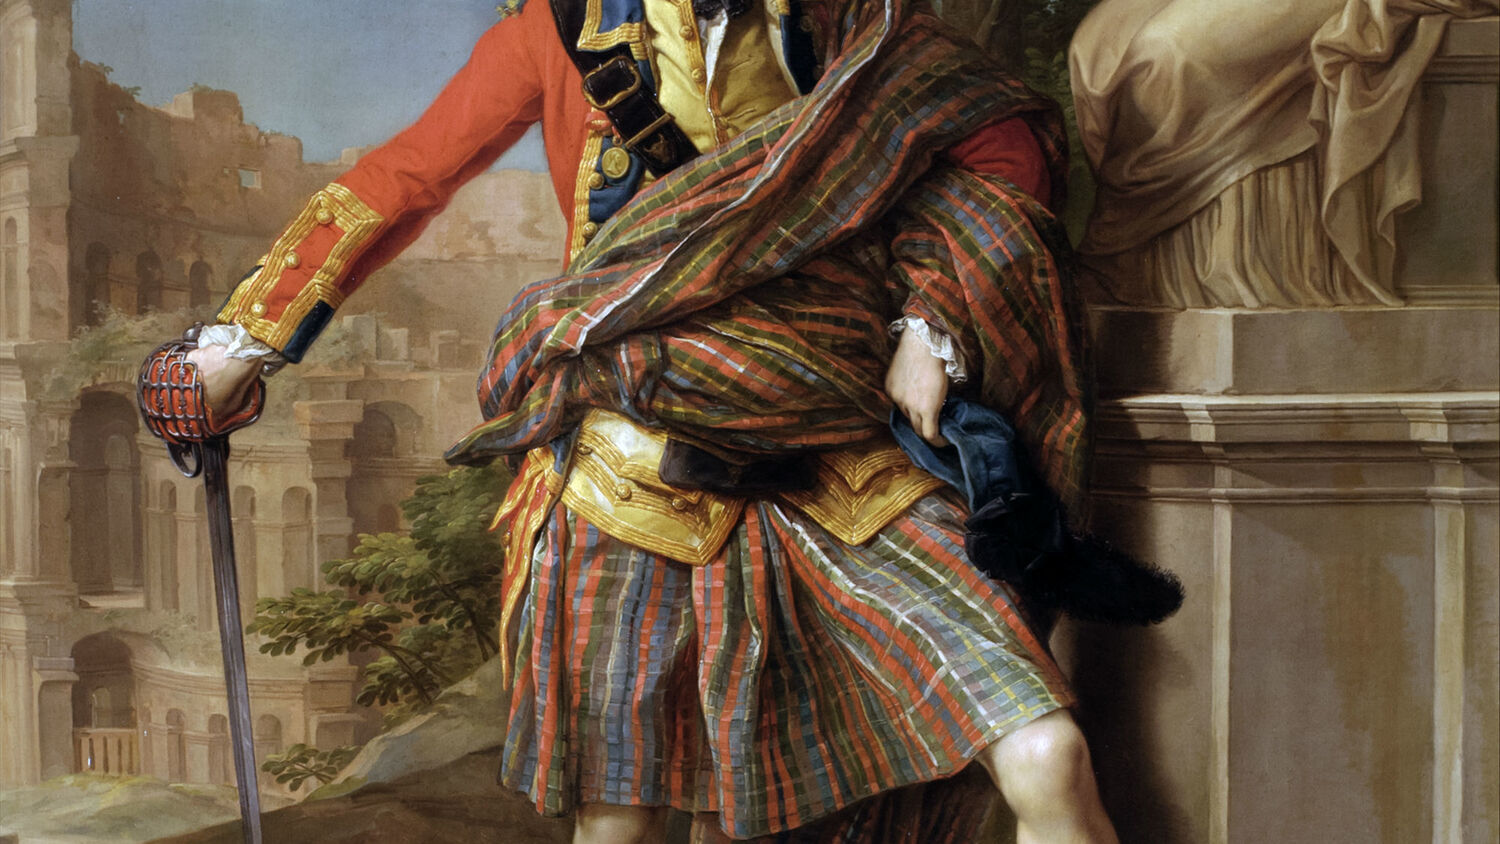 The portrait of Colonel William Gordon, painted by Pompeo Batoni in 1766. The tartan-clad Gordon stands with one hand on his hip, the other resting on his sword. There is a classical background.